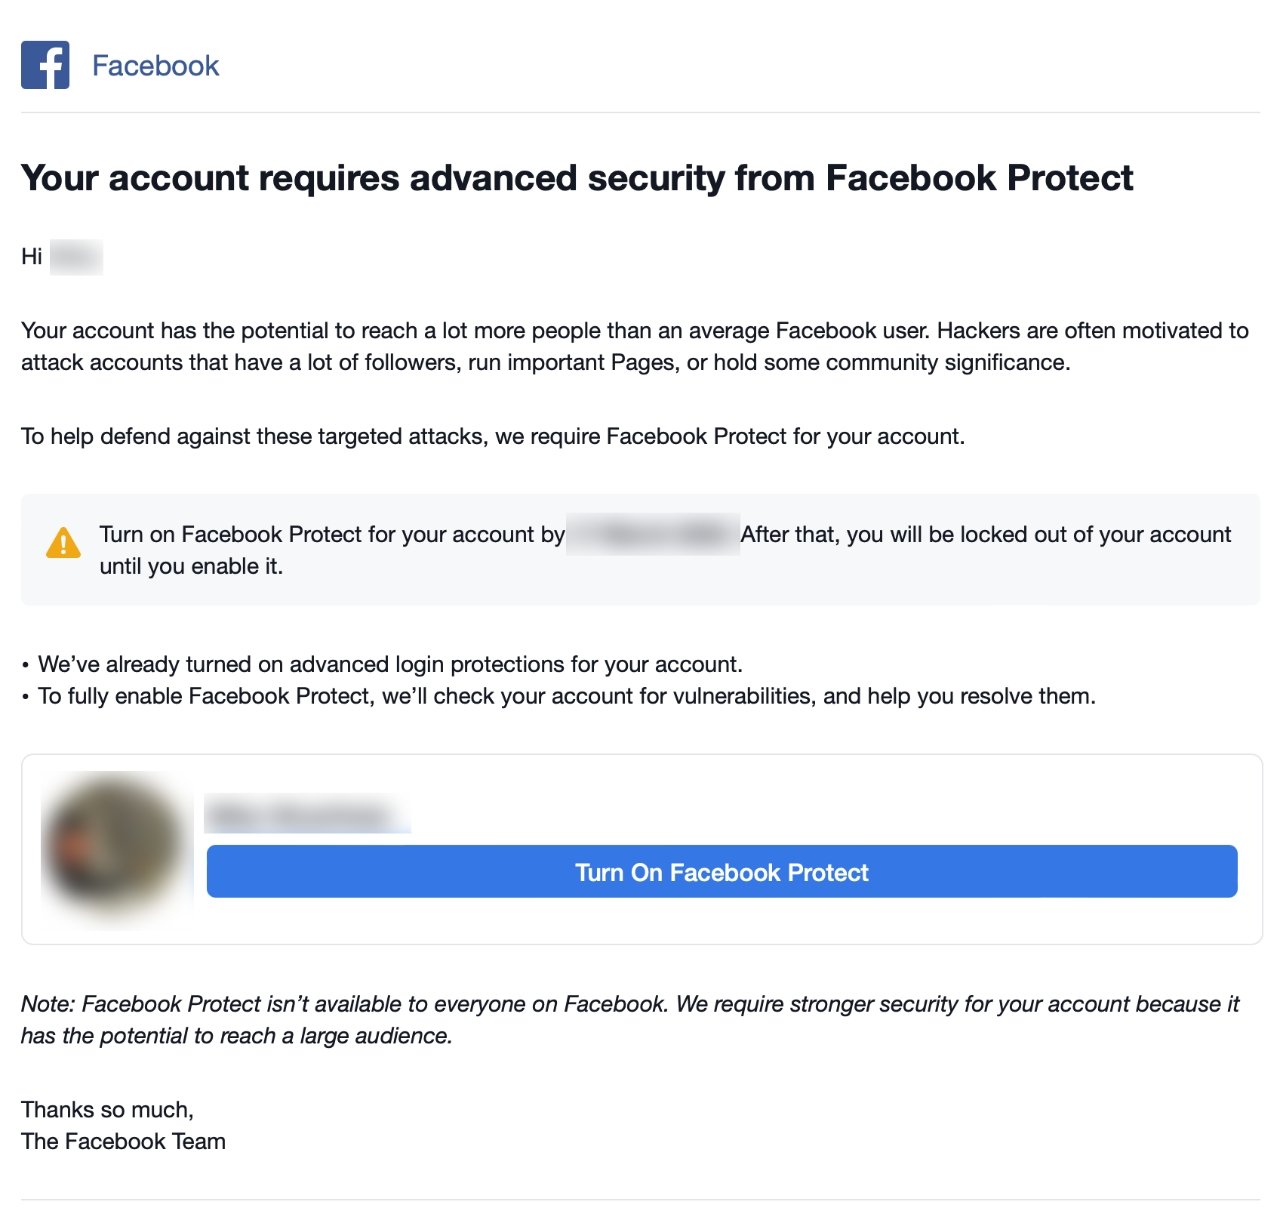 The email sent by Facebook